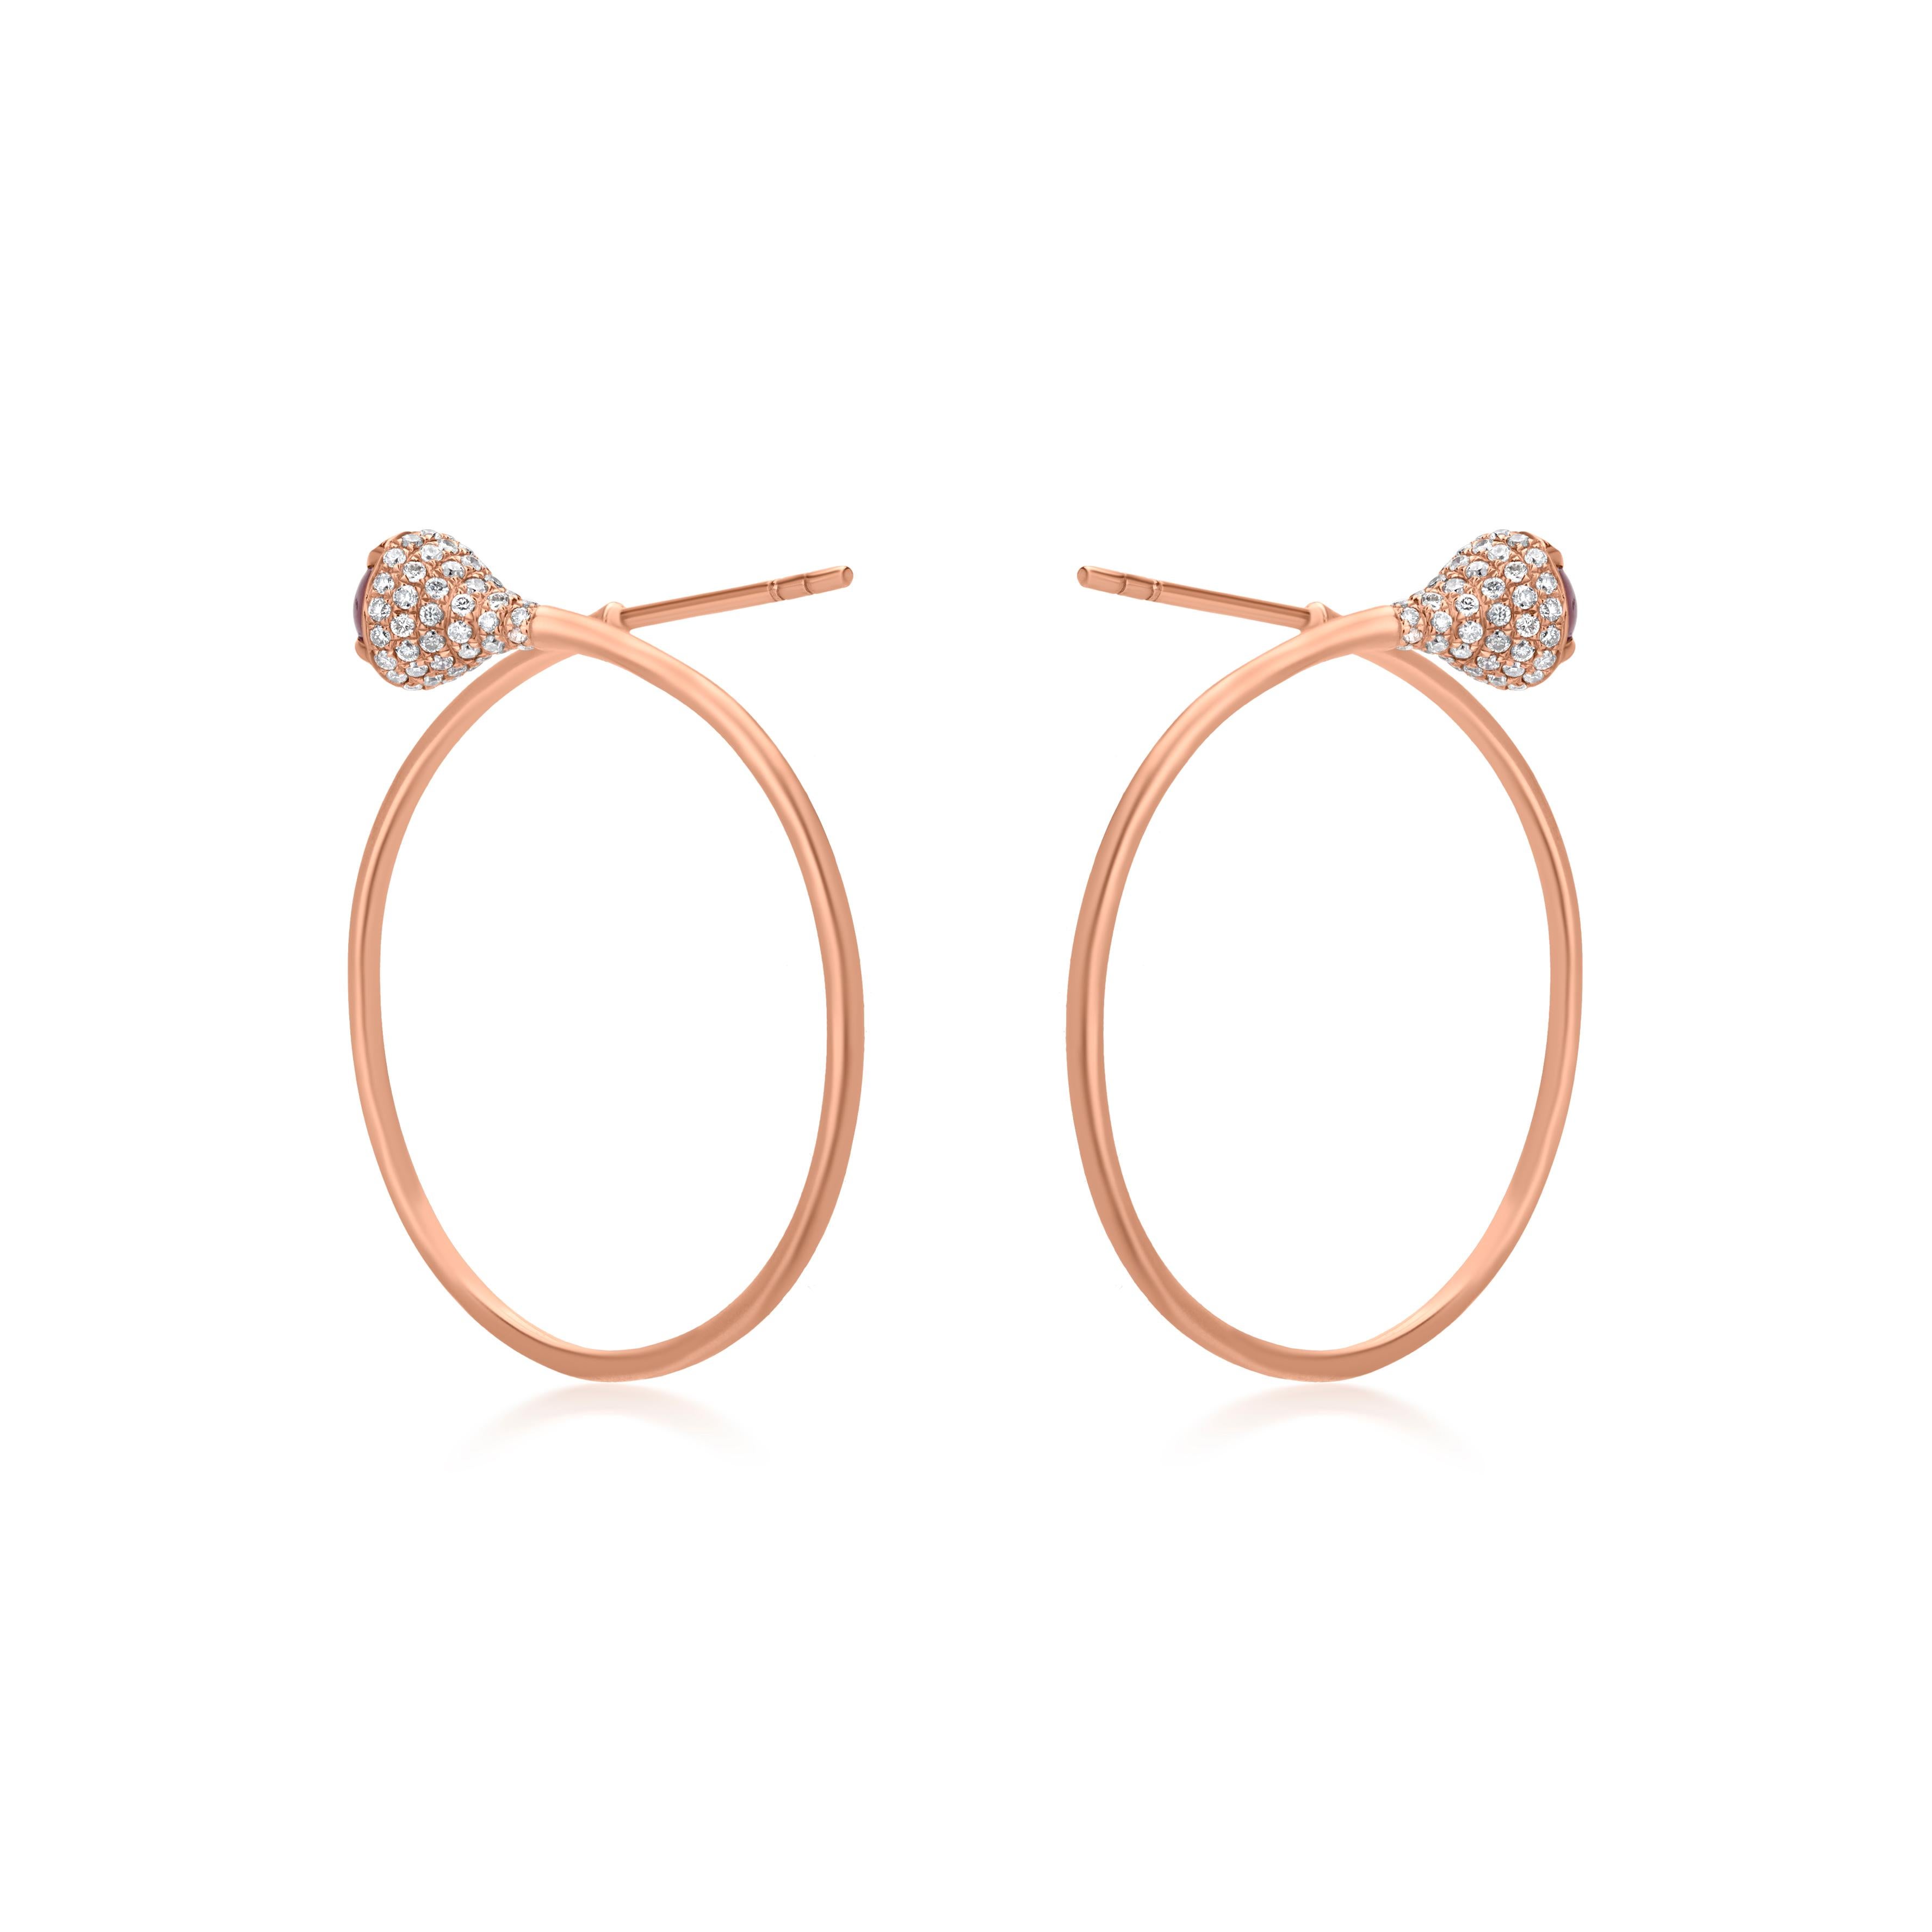 Contemporary Gemistry 2.57cttw. Ruby and Diamond Hoop Earrings in 18k Rose Gold